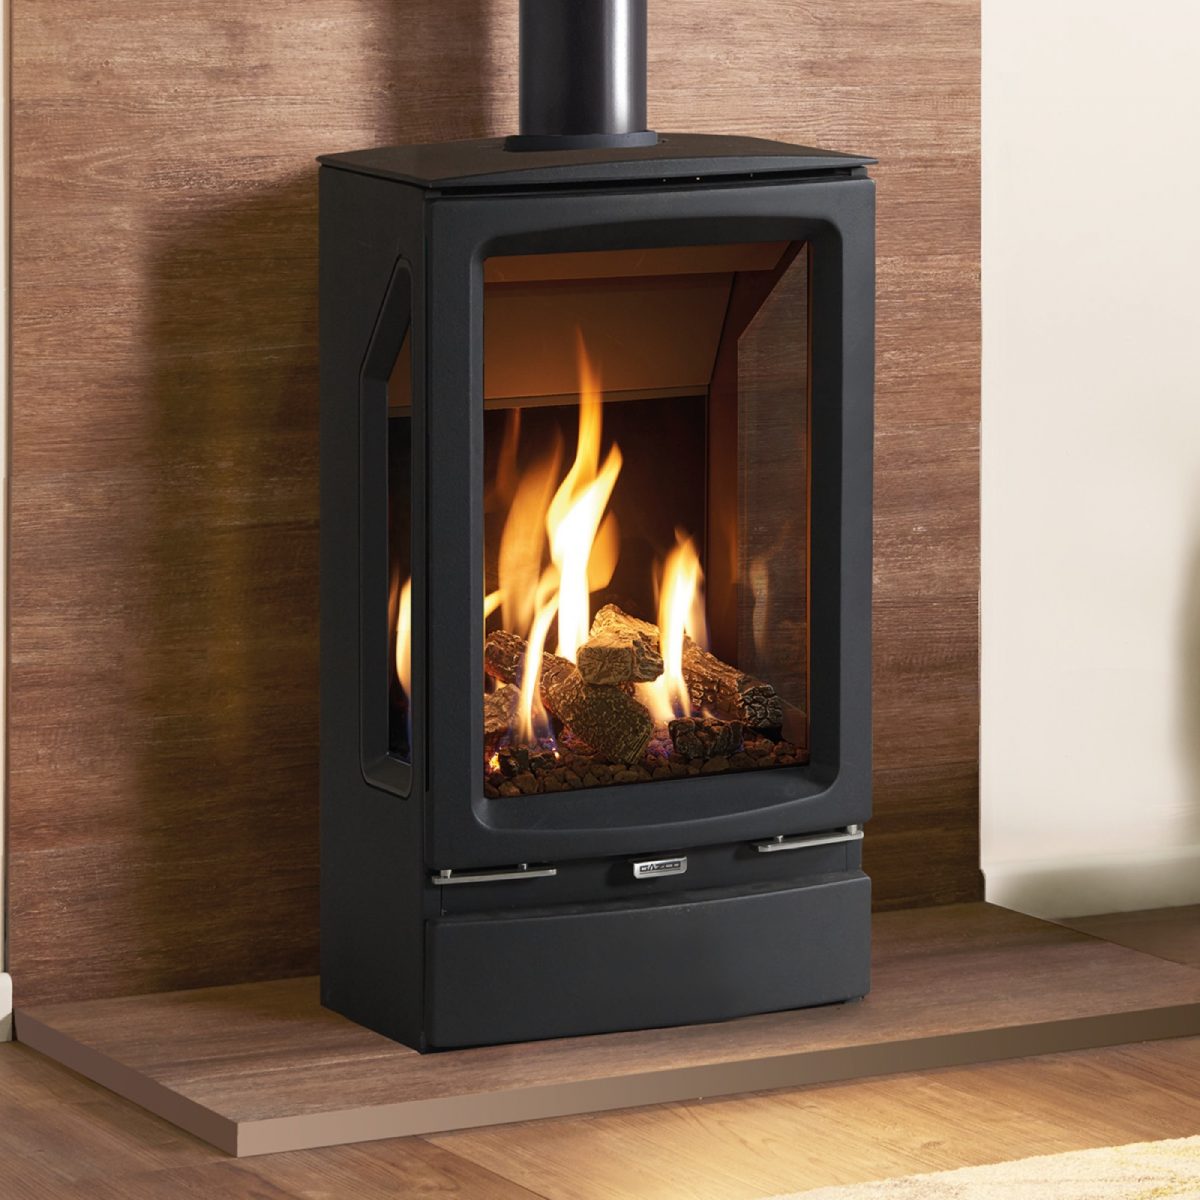 Gazco Vogue Midi T, 3 Sided, Black Glass Lining, Natural Gas, Conventional Flue Stove